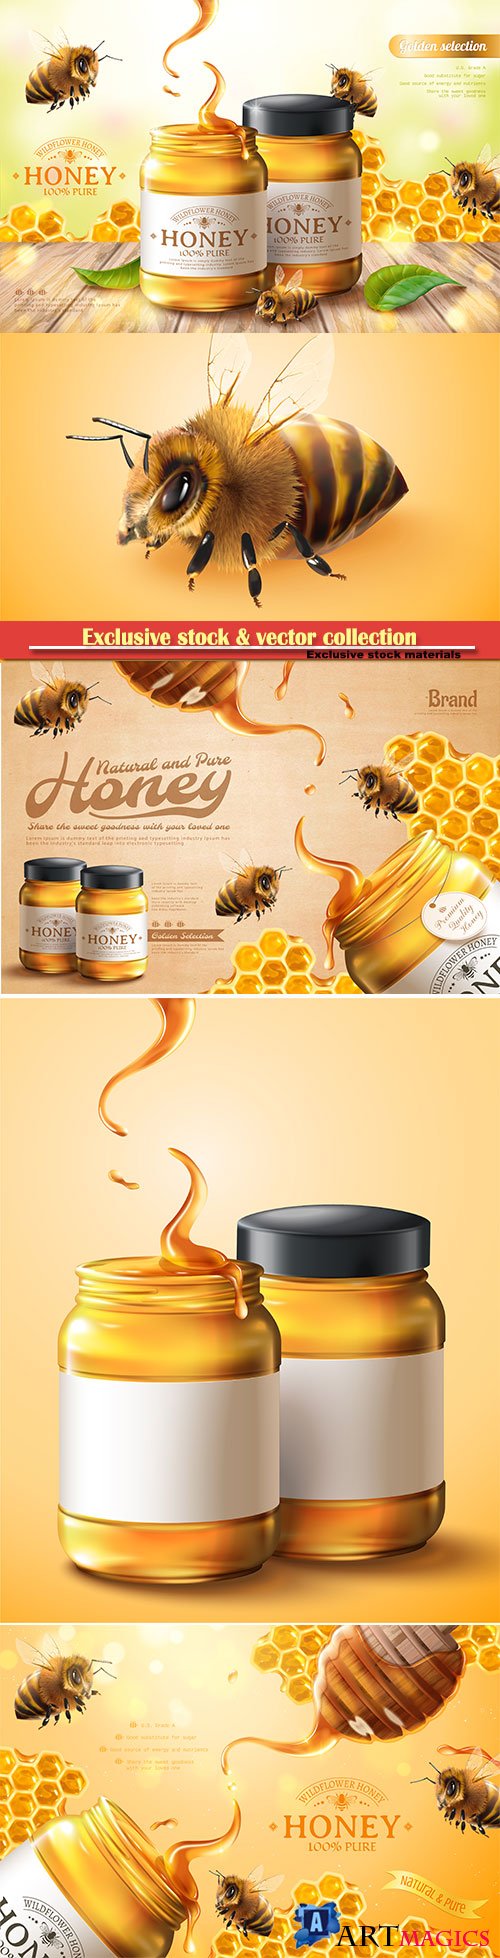 Pure honey ads with bees and honeycomb in 3d vector illustration